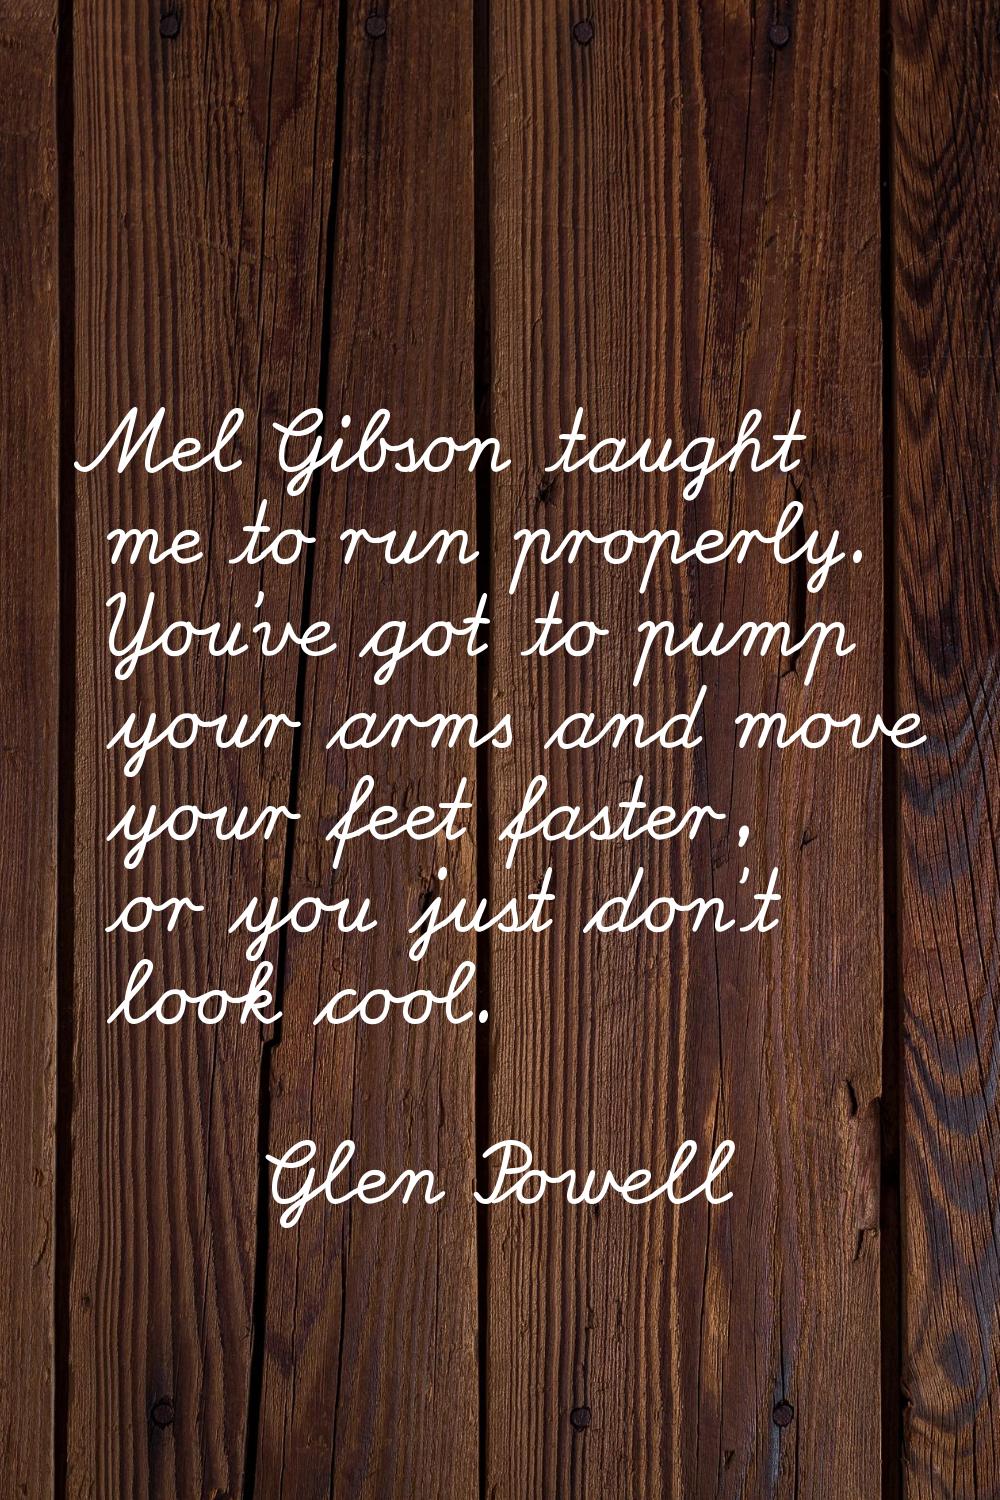 Mel Gibson taught me to run properly. You've got to pump your arms and move your feet faster, or yo